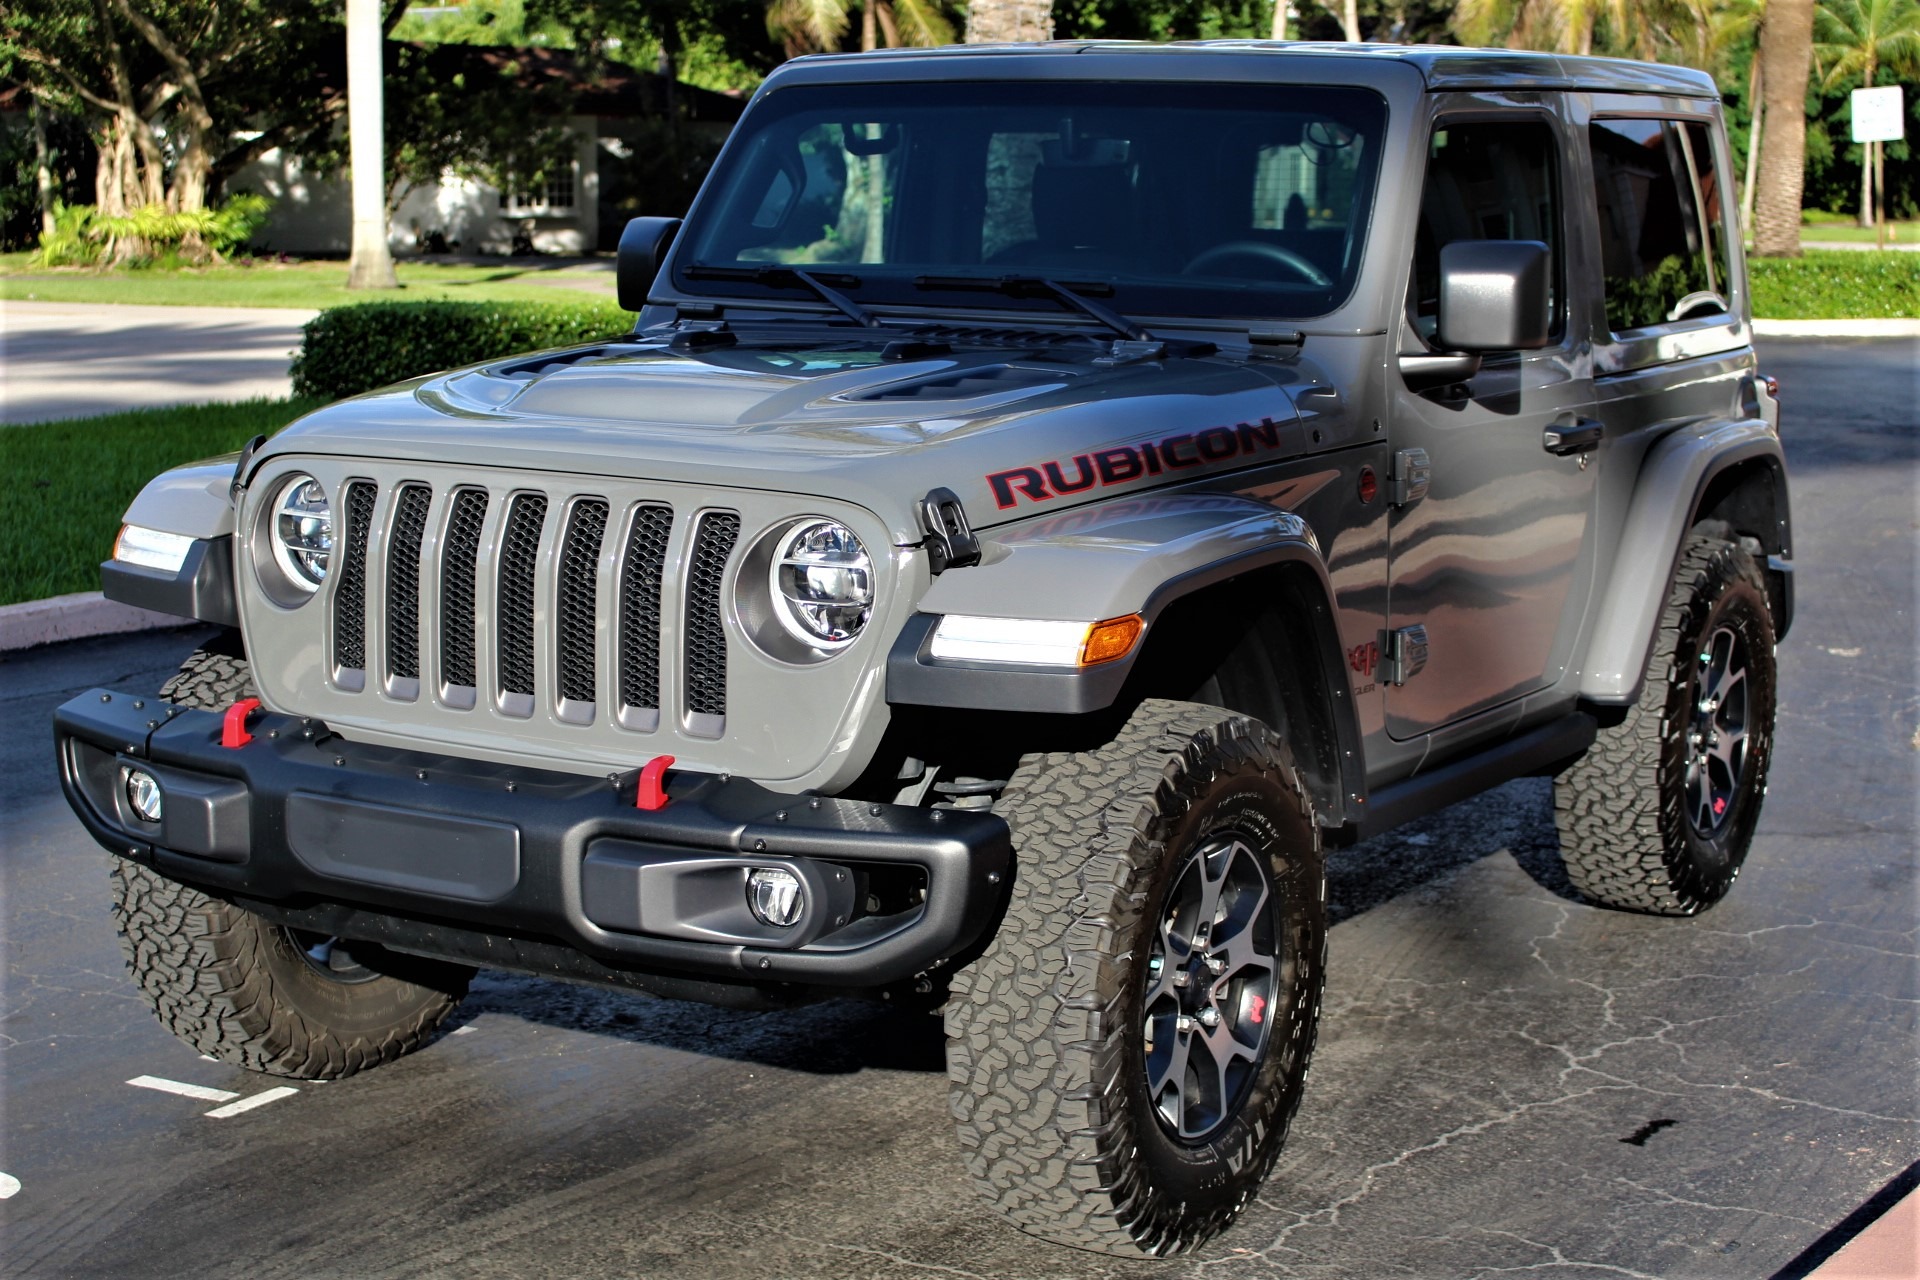 Used 2018 Jeep Wrangler Rubicon for sale Sold at The Gables Sports Cars in Miami FL 33146 3